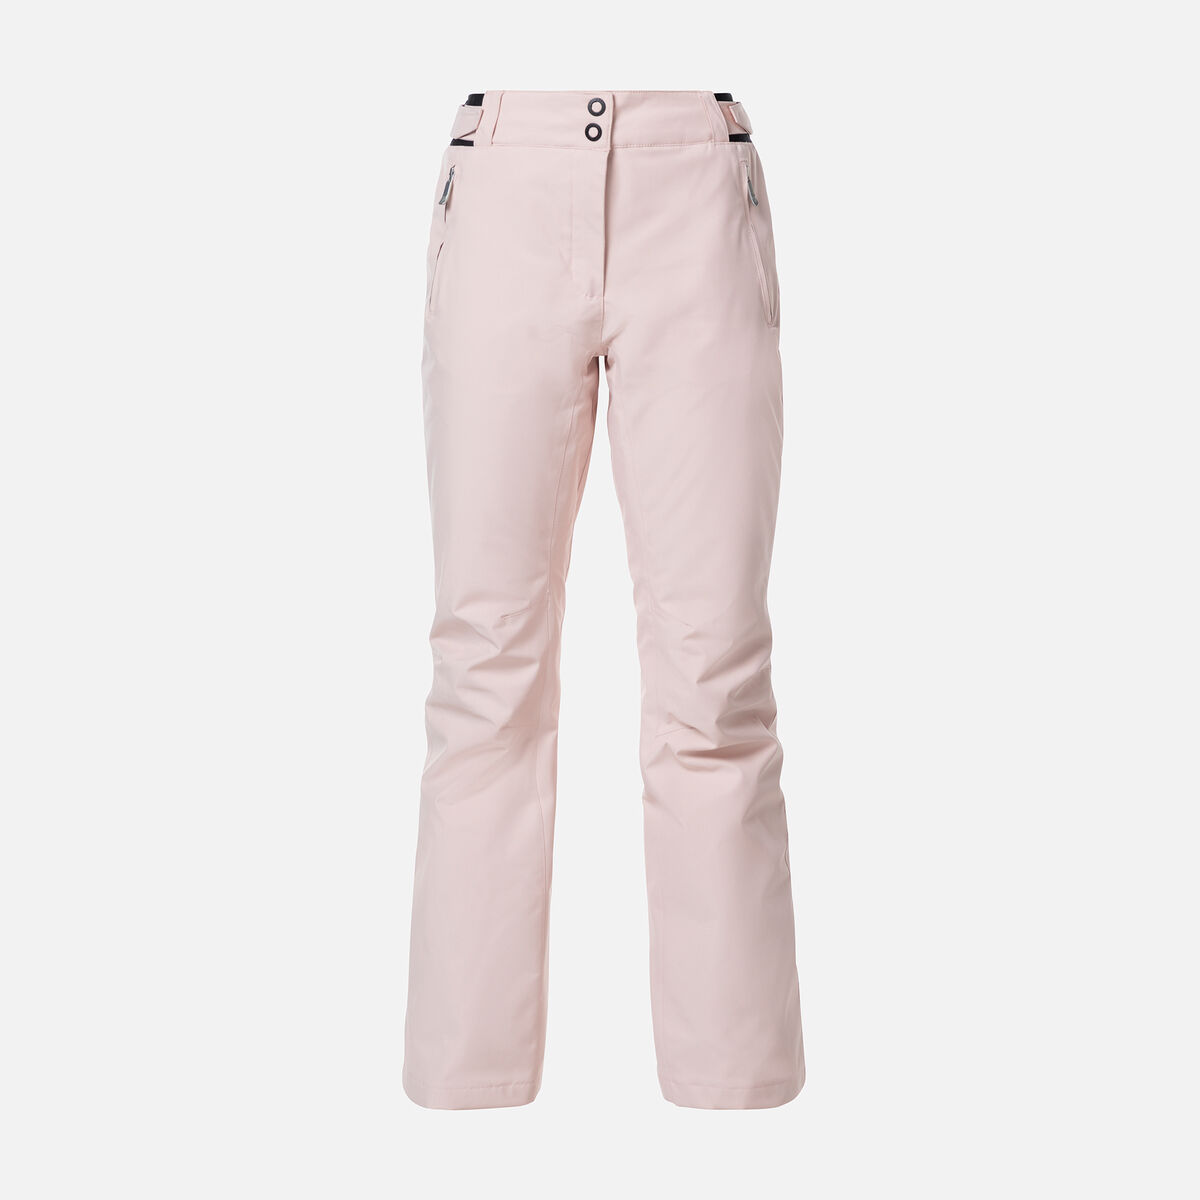 32 Degrees Ladies' Lightweight Twill Pull on Pant Pink